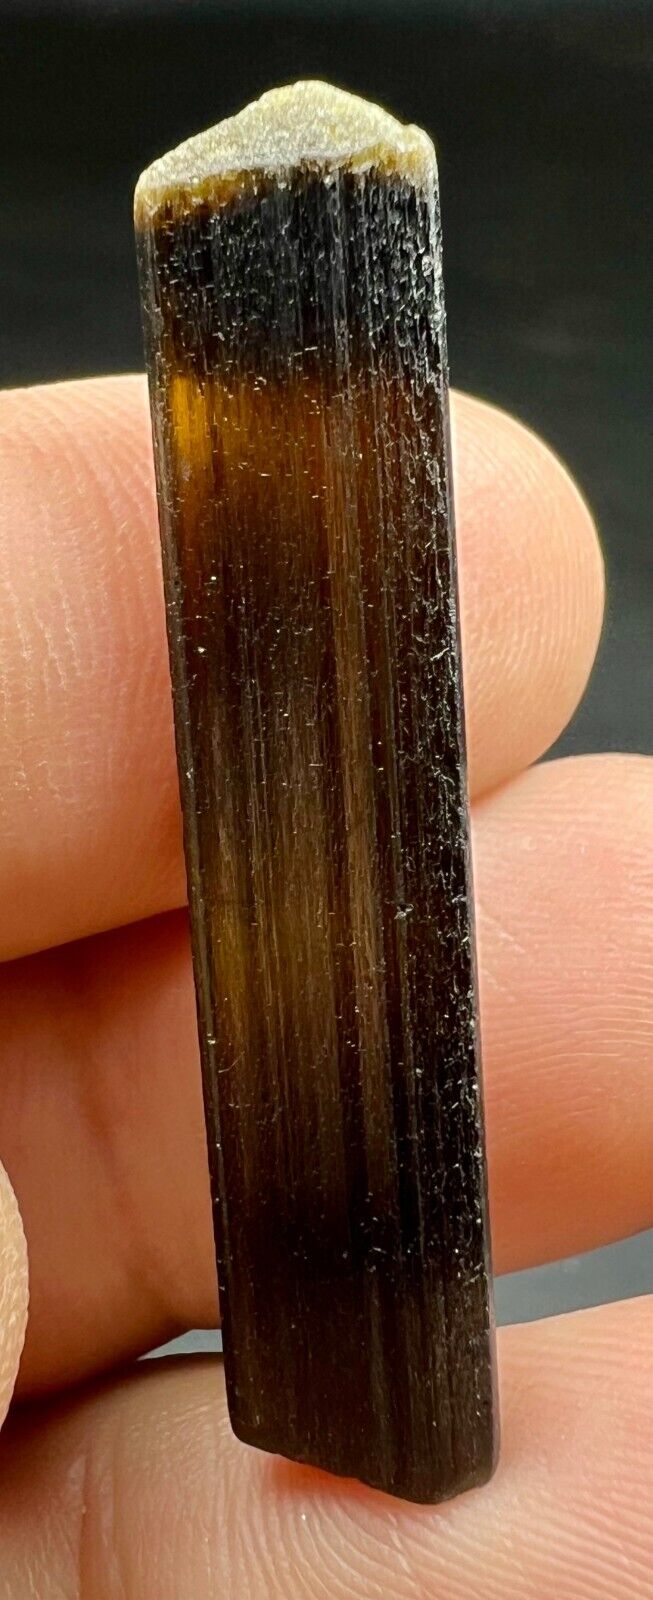 21 Carat Tourmaline Crystal From Afghanistan